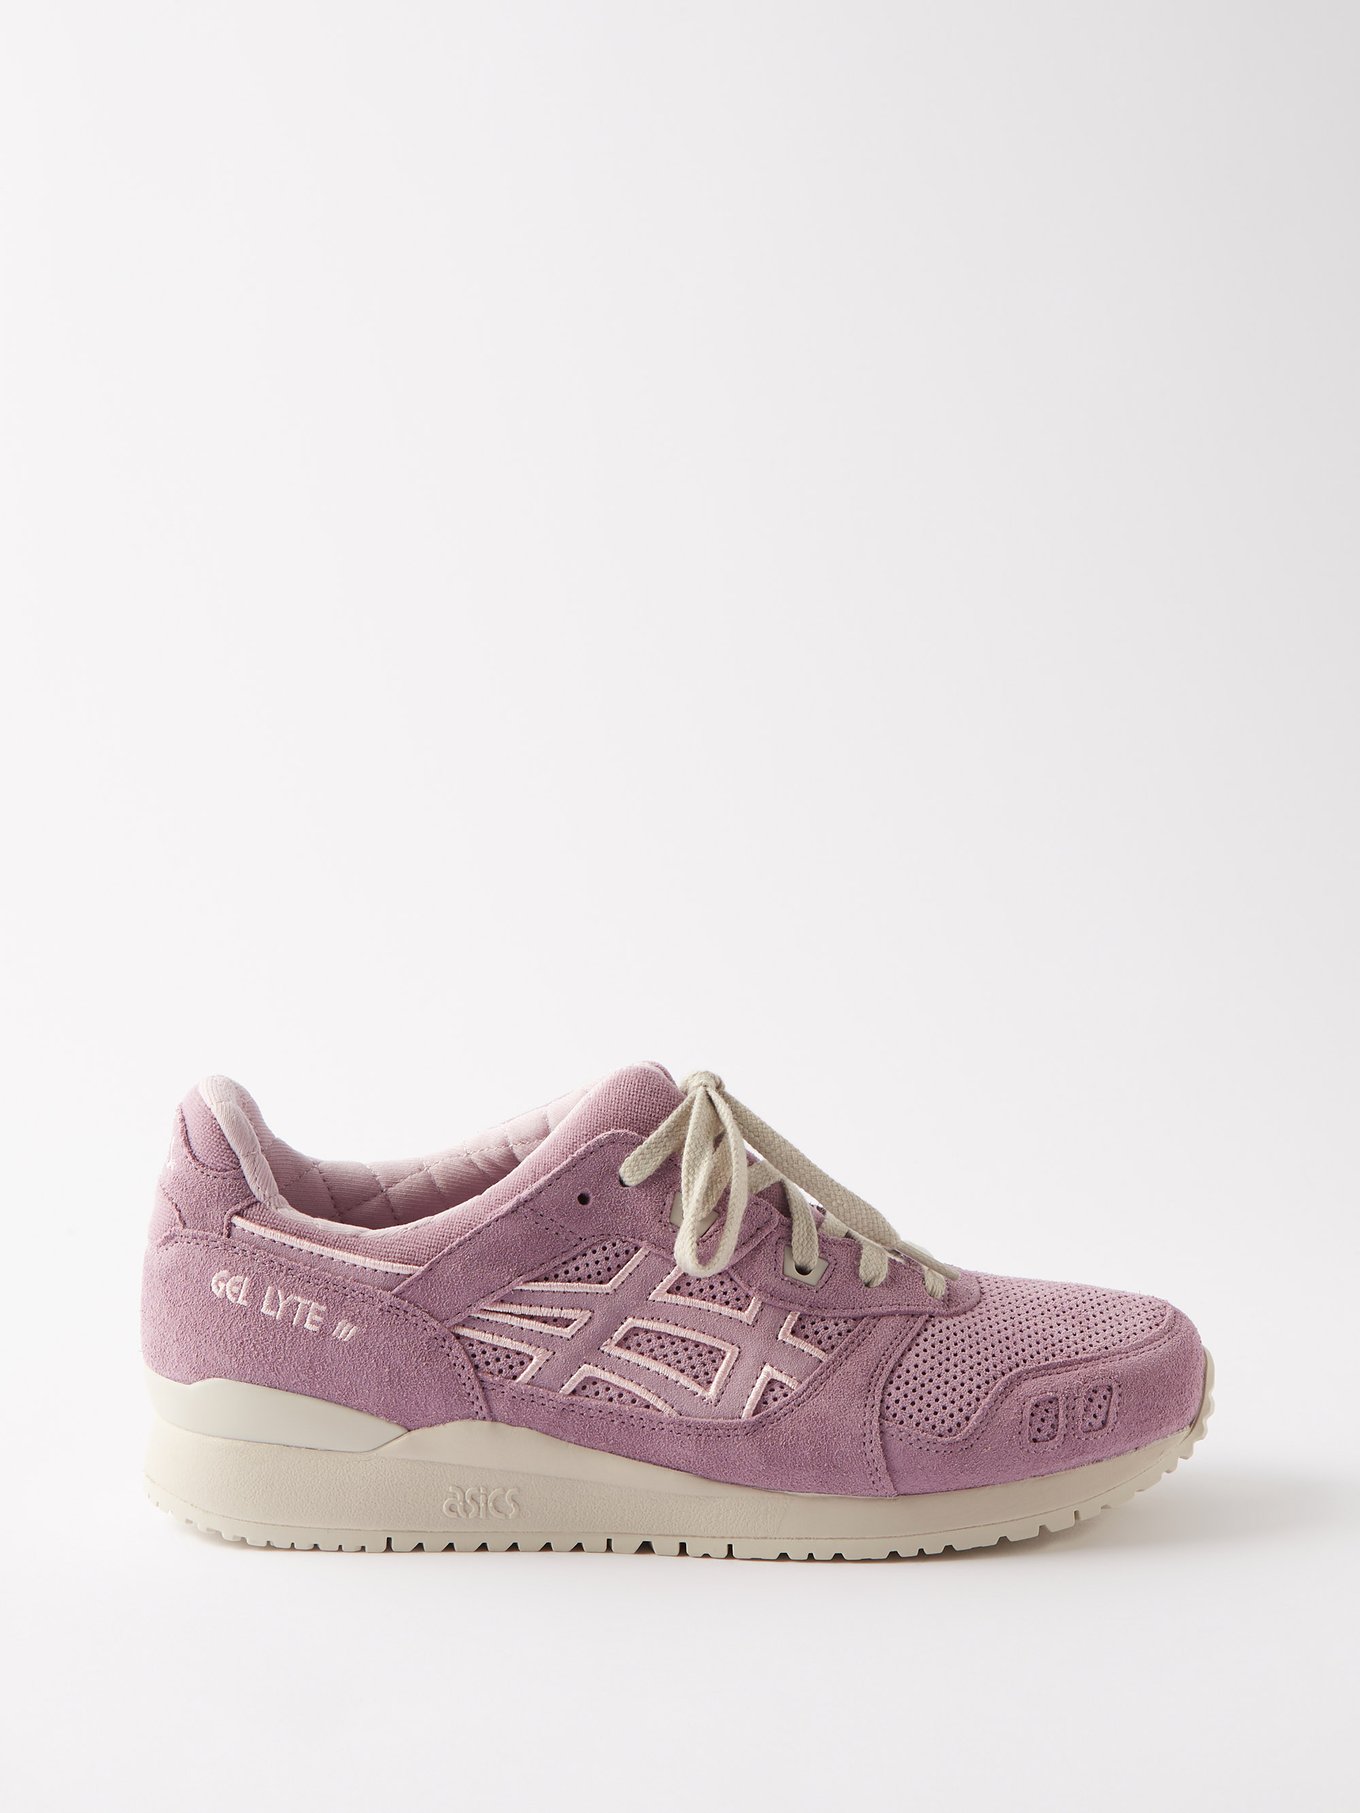 Pink Gel-Lyte III suede trainers | Asics | MATCHESFASHION UK